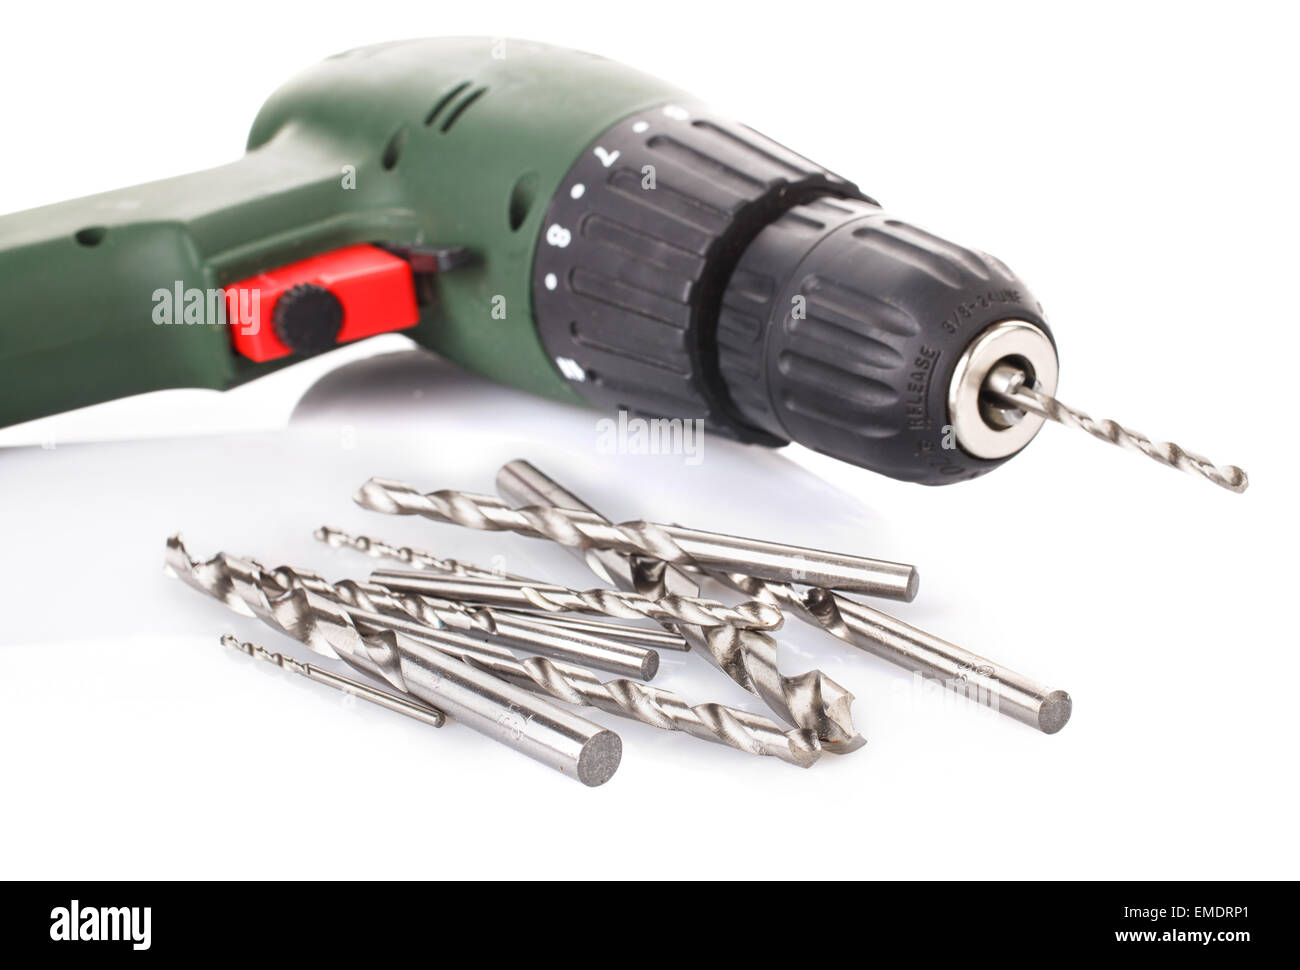 Drill and set of drill bits on white Stock Photo